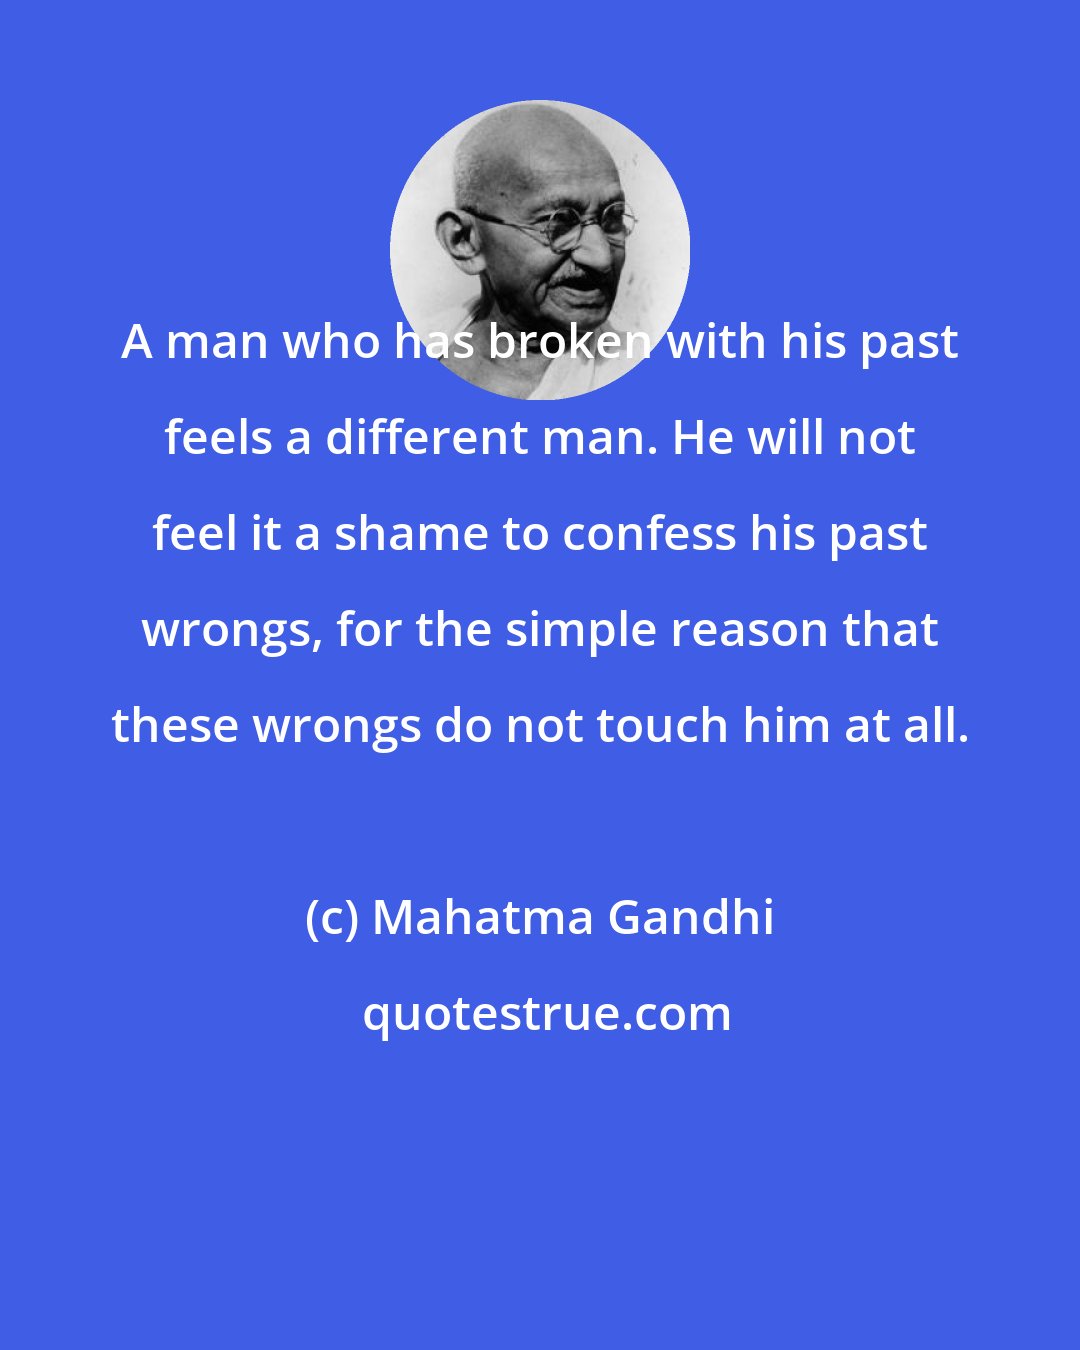 Mahatma Gandhi: A man who has broken with his past feels a different man. He will not feel it a shame to confess his past wrongs, for the simple reason that these wrongs do not touch him at all.